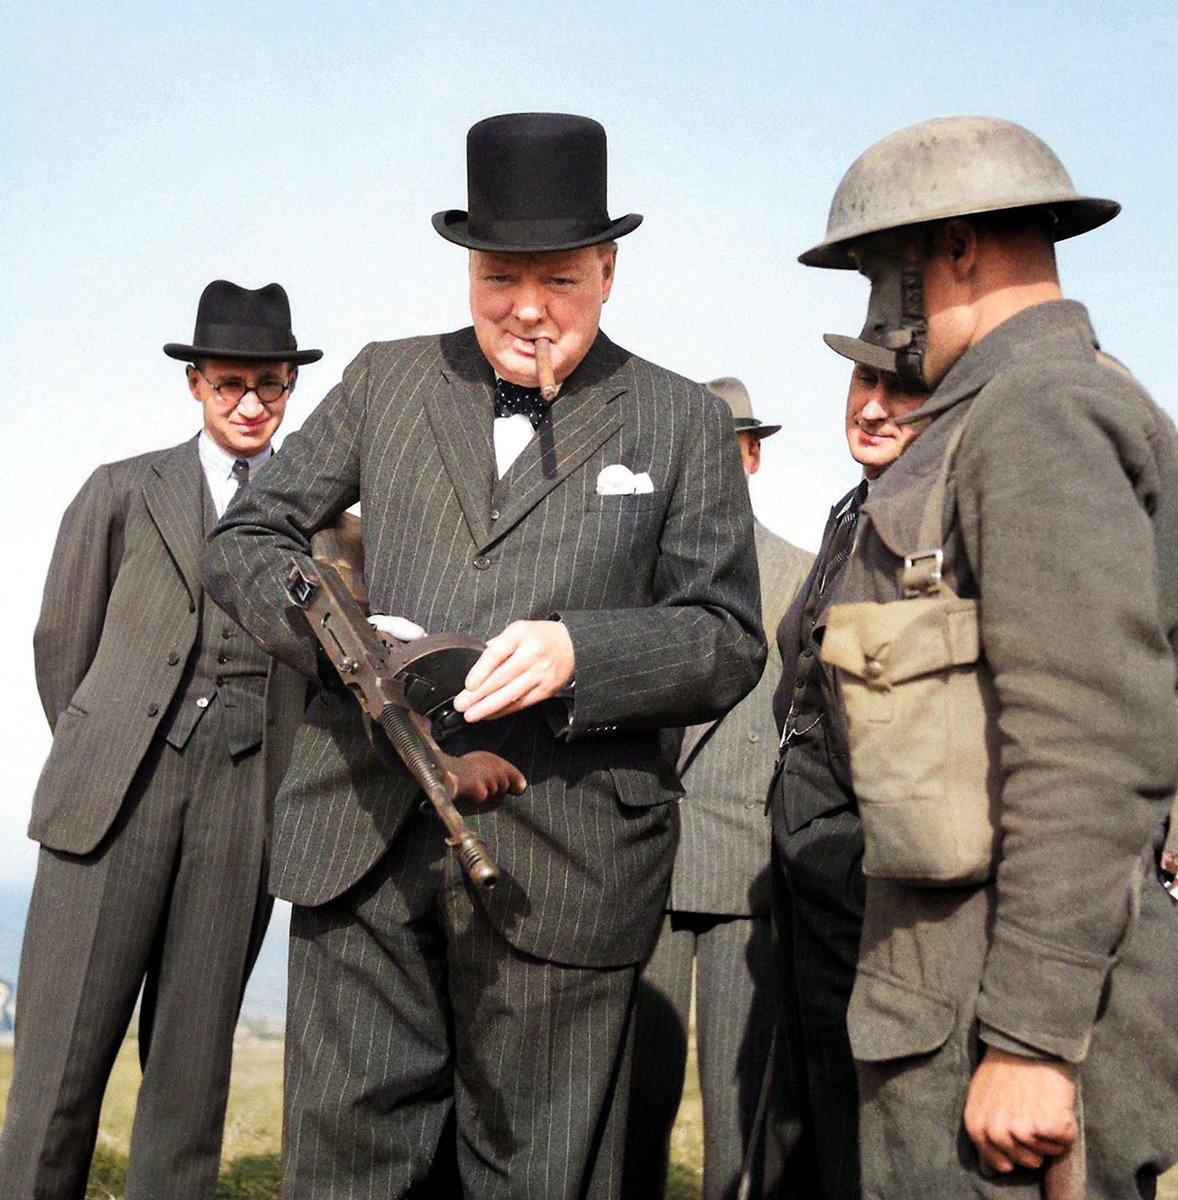 Winston Churchill with a Tommy Gun during an inspection near Hartlepool in 1940. #winstonchurchill #1940s #hartlepool #tommygun #ww2 #wwII